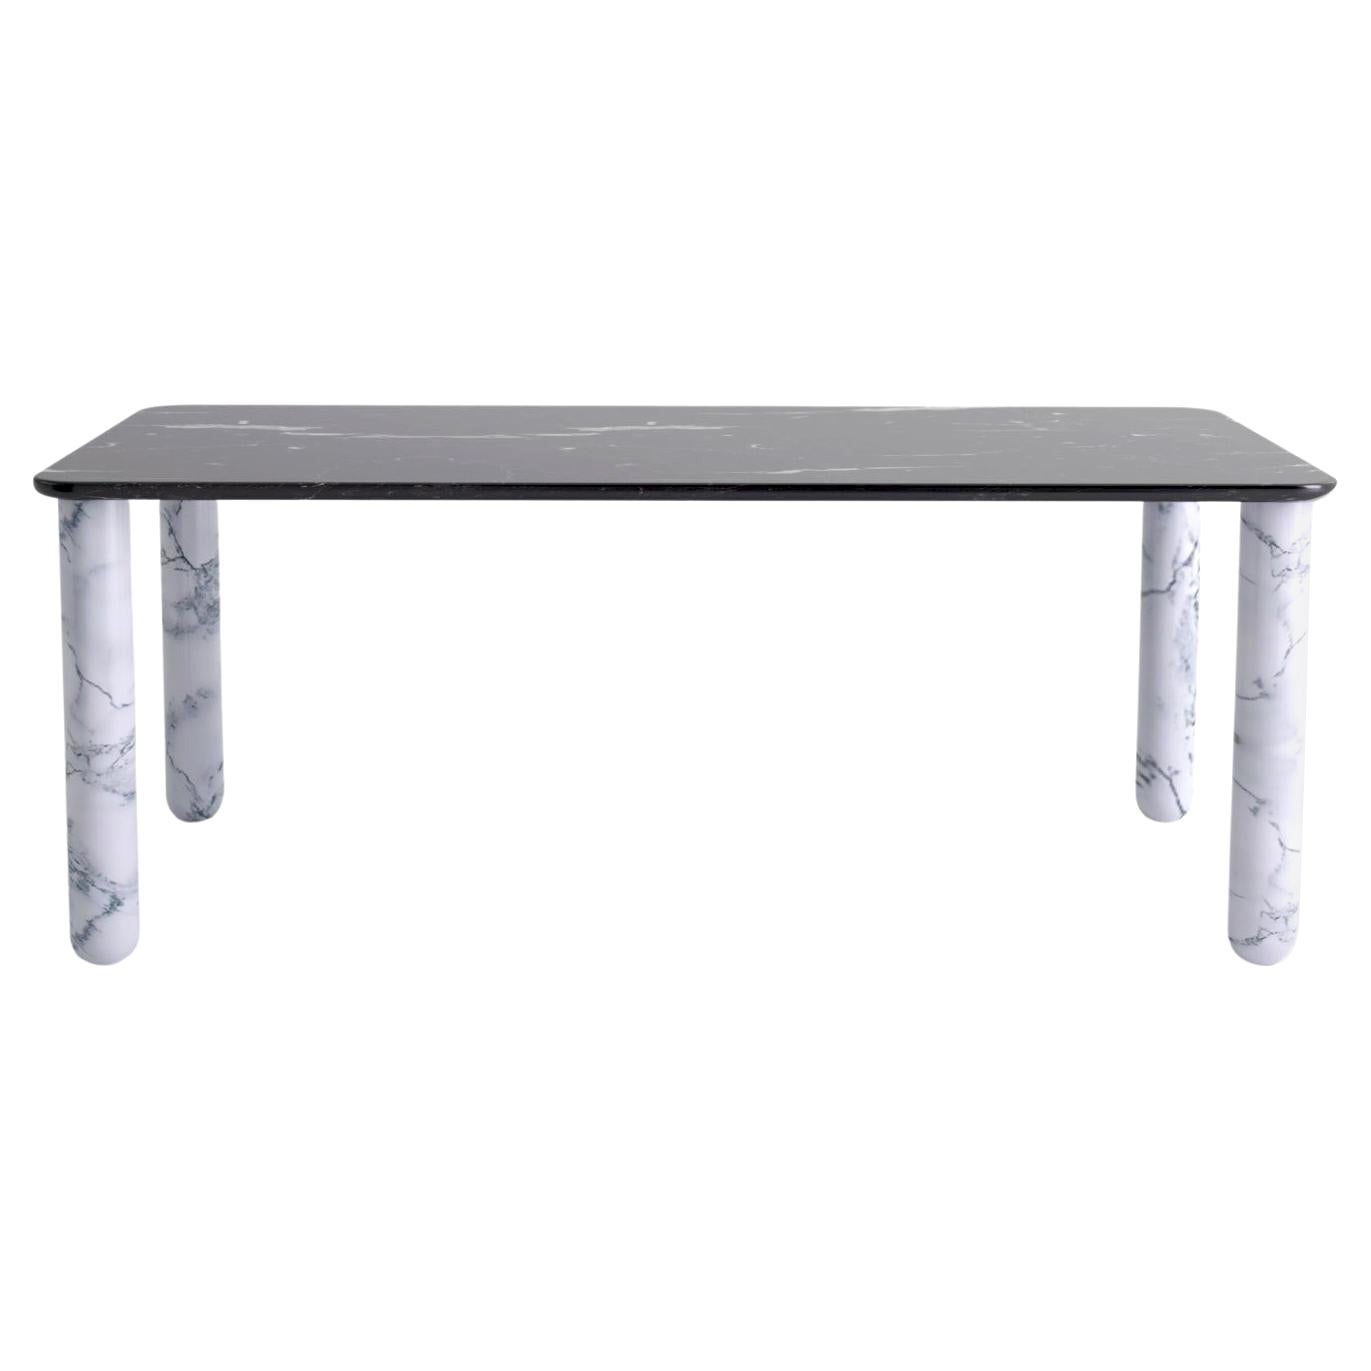 XL Large Black and White Marble "Sunday" Dining Table, Jean-Baptiste Souletie